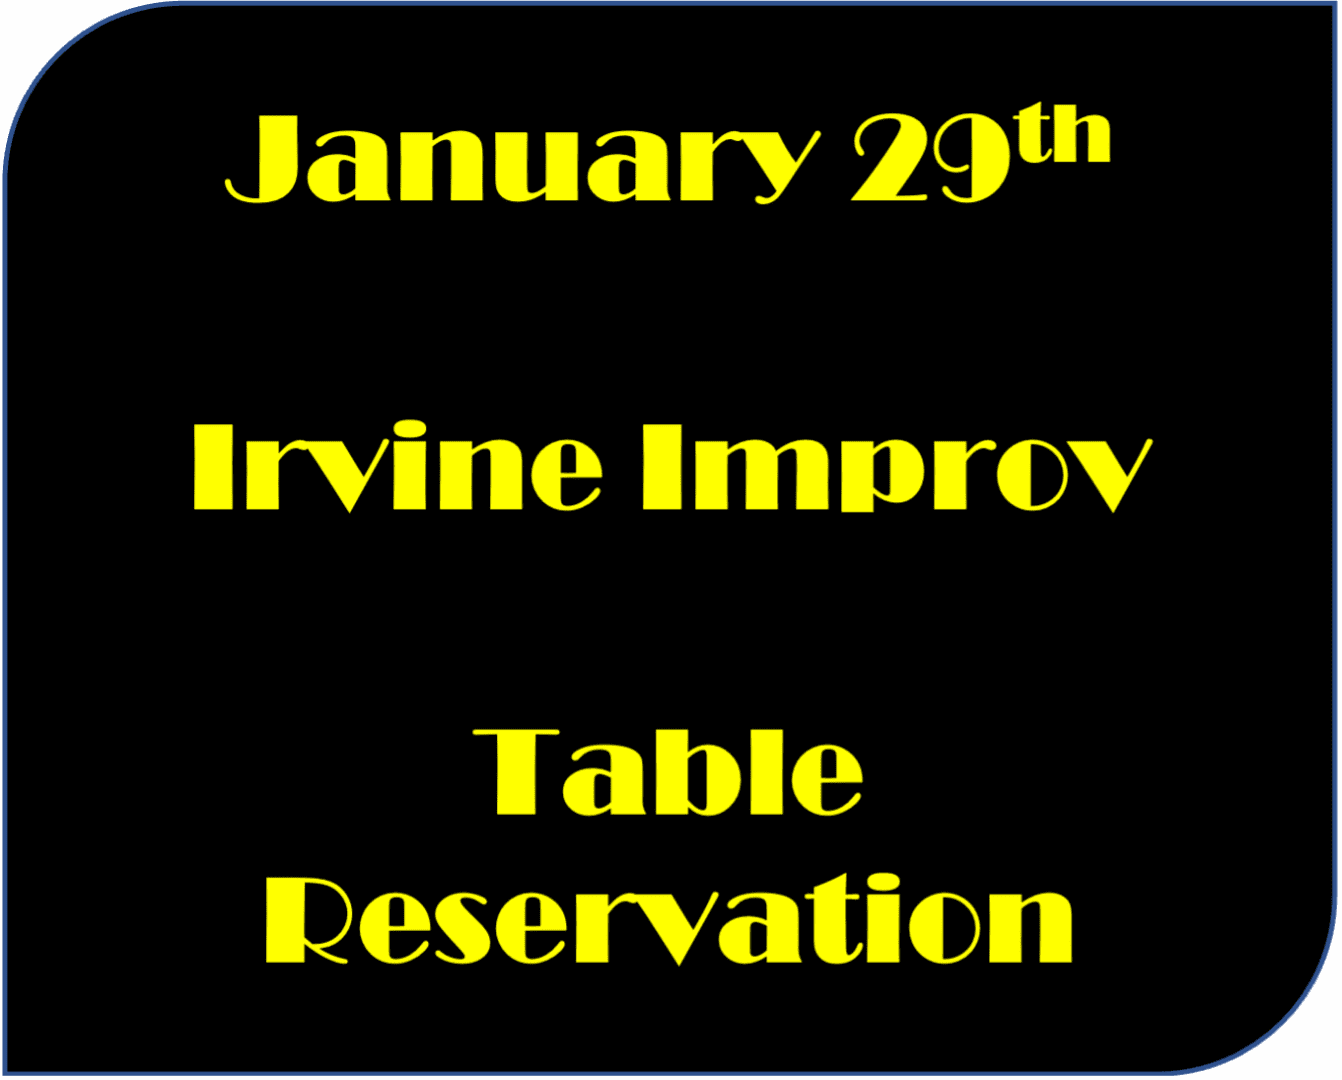 January 29th Table reservation poster